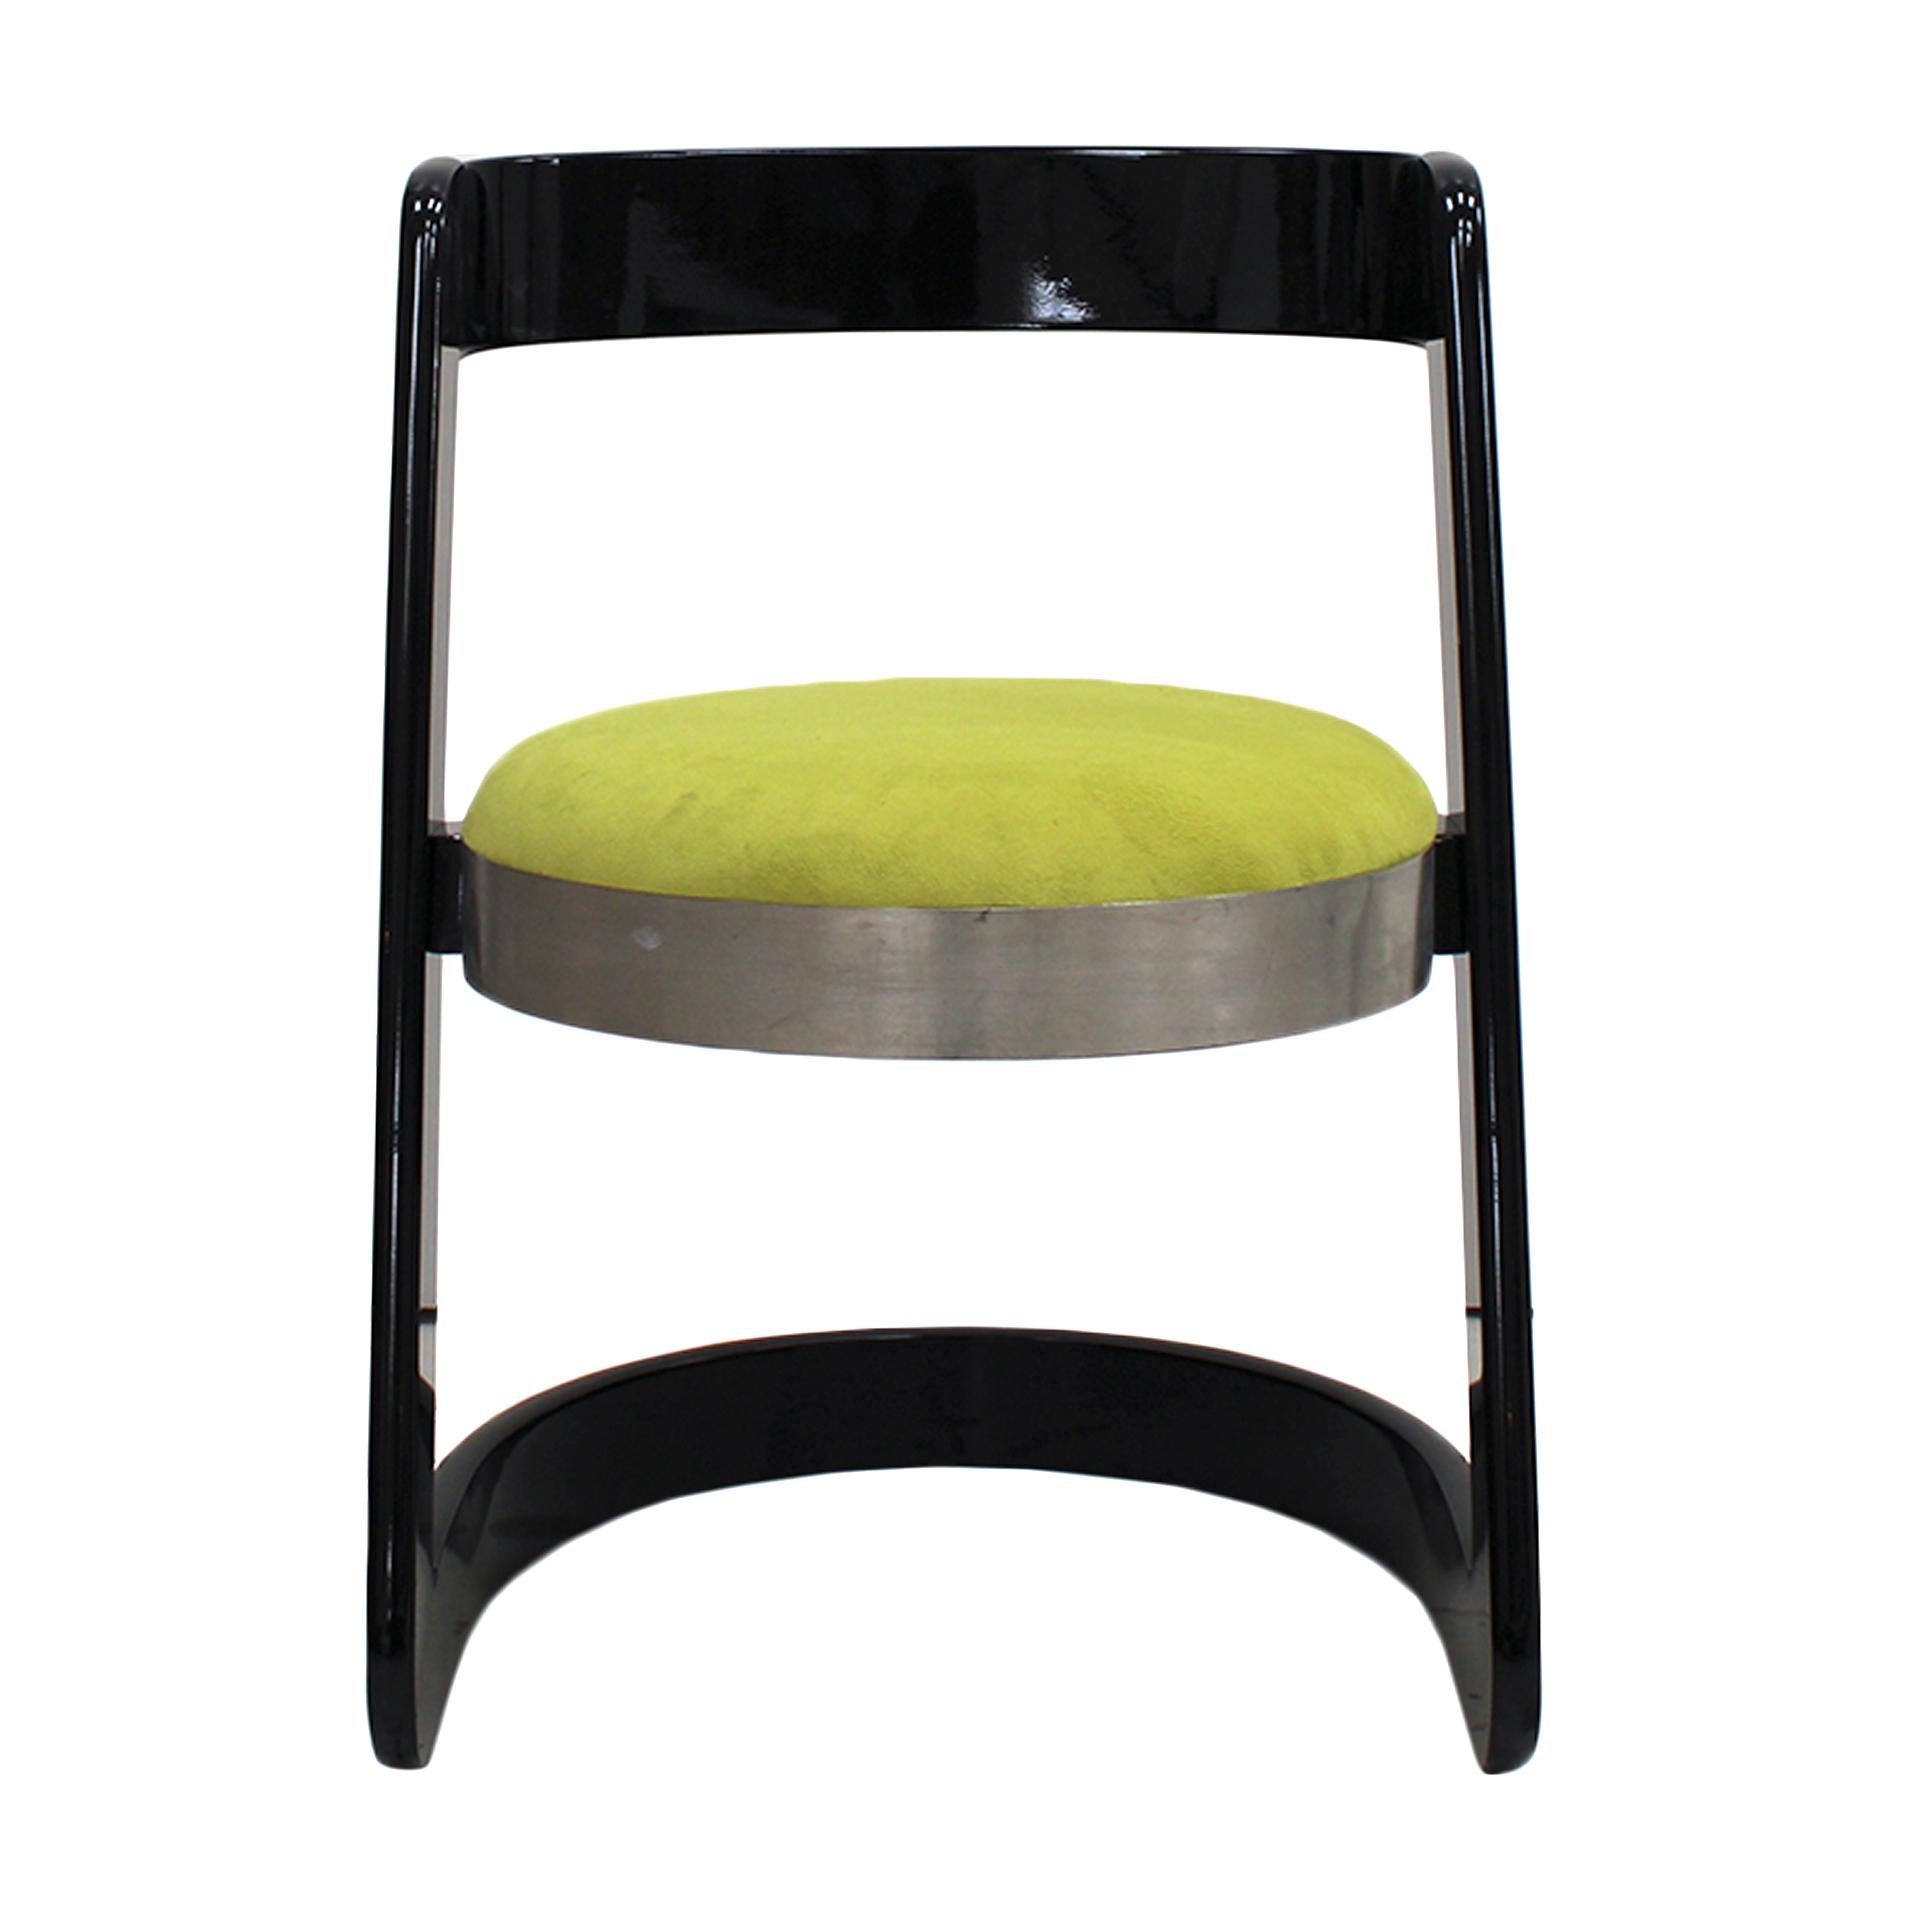 Mid Century modern set of six chairs designed by Willy Rizzo for Mario Sabot. Made of black lacquered wood structure. Seat reupholstered in green cotton velvet with polished steel frame, Italy, 1970s.

These chairs are true design icons. Their